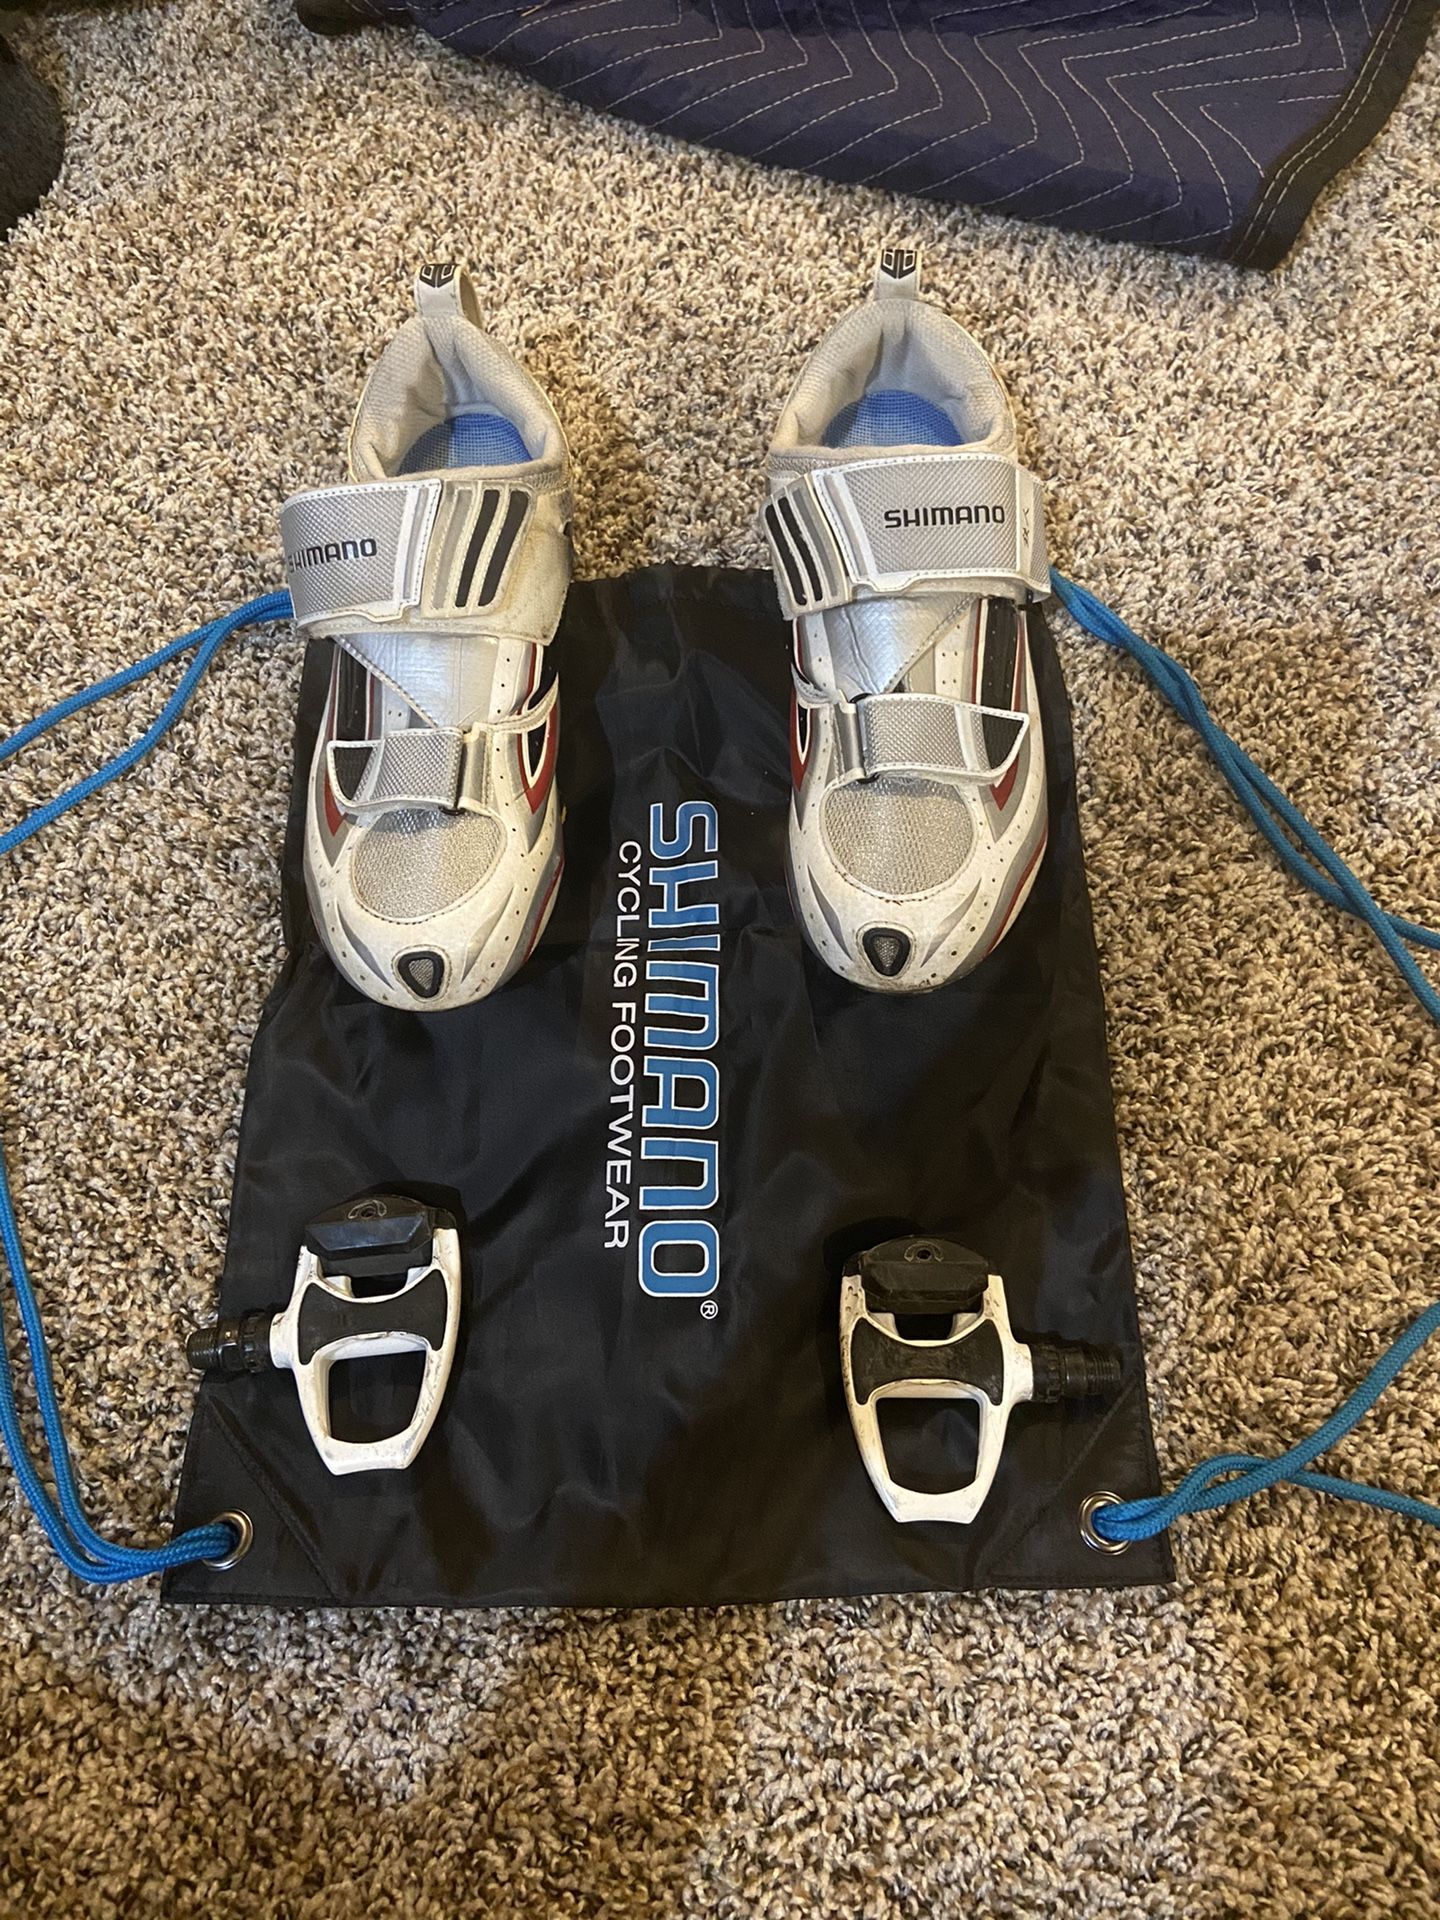 Cycling Shoes and Pedals Combo